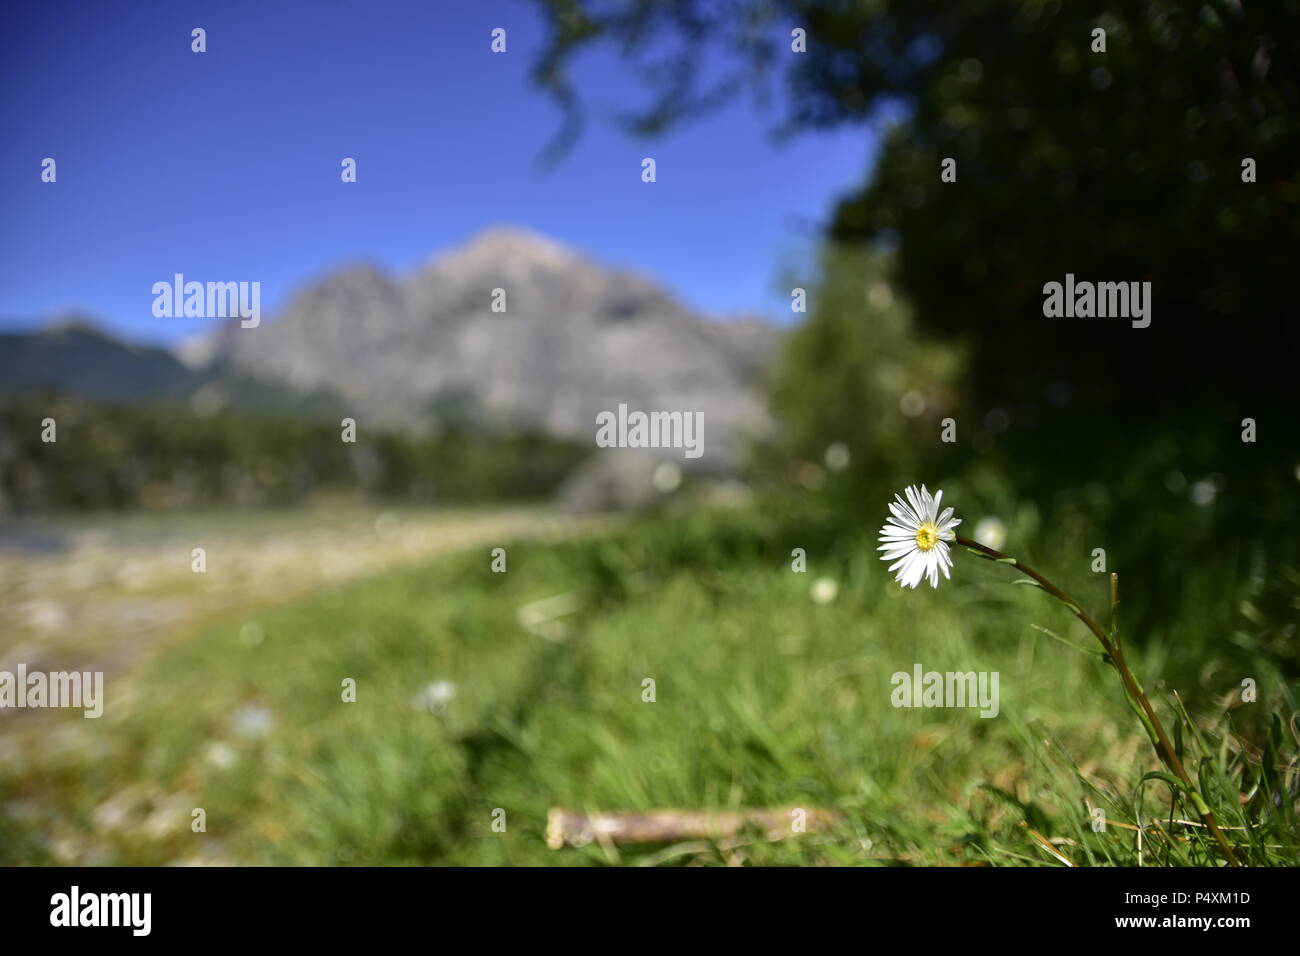 Wild flower in the foreground. In the background you can see the Andes mountains in Bariloche, Argentina. Stock Photo